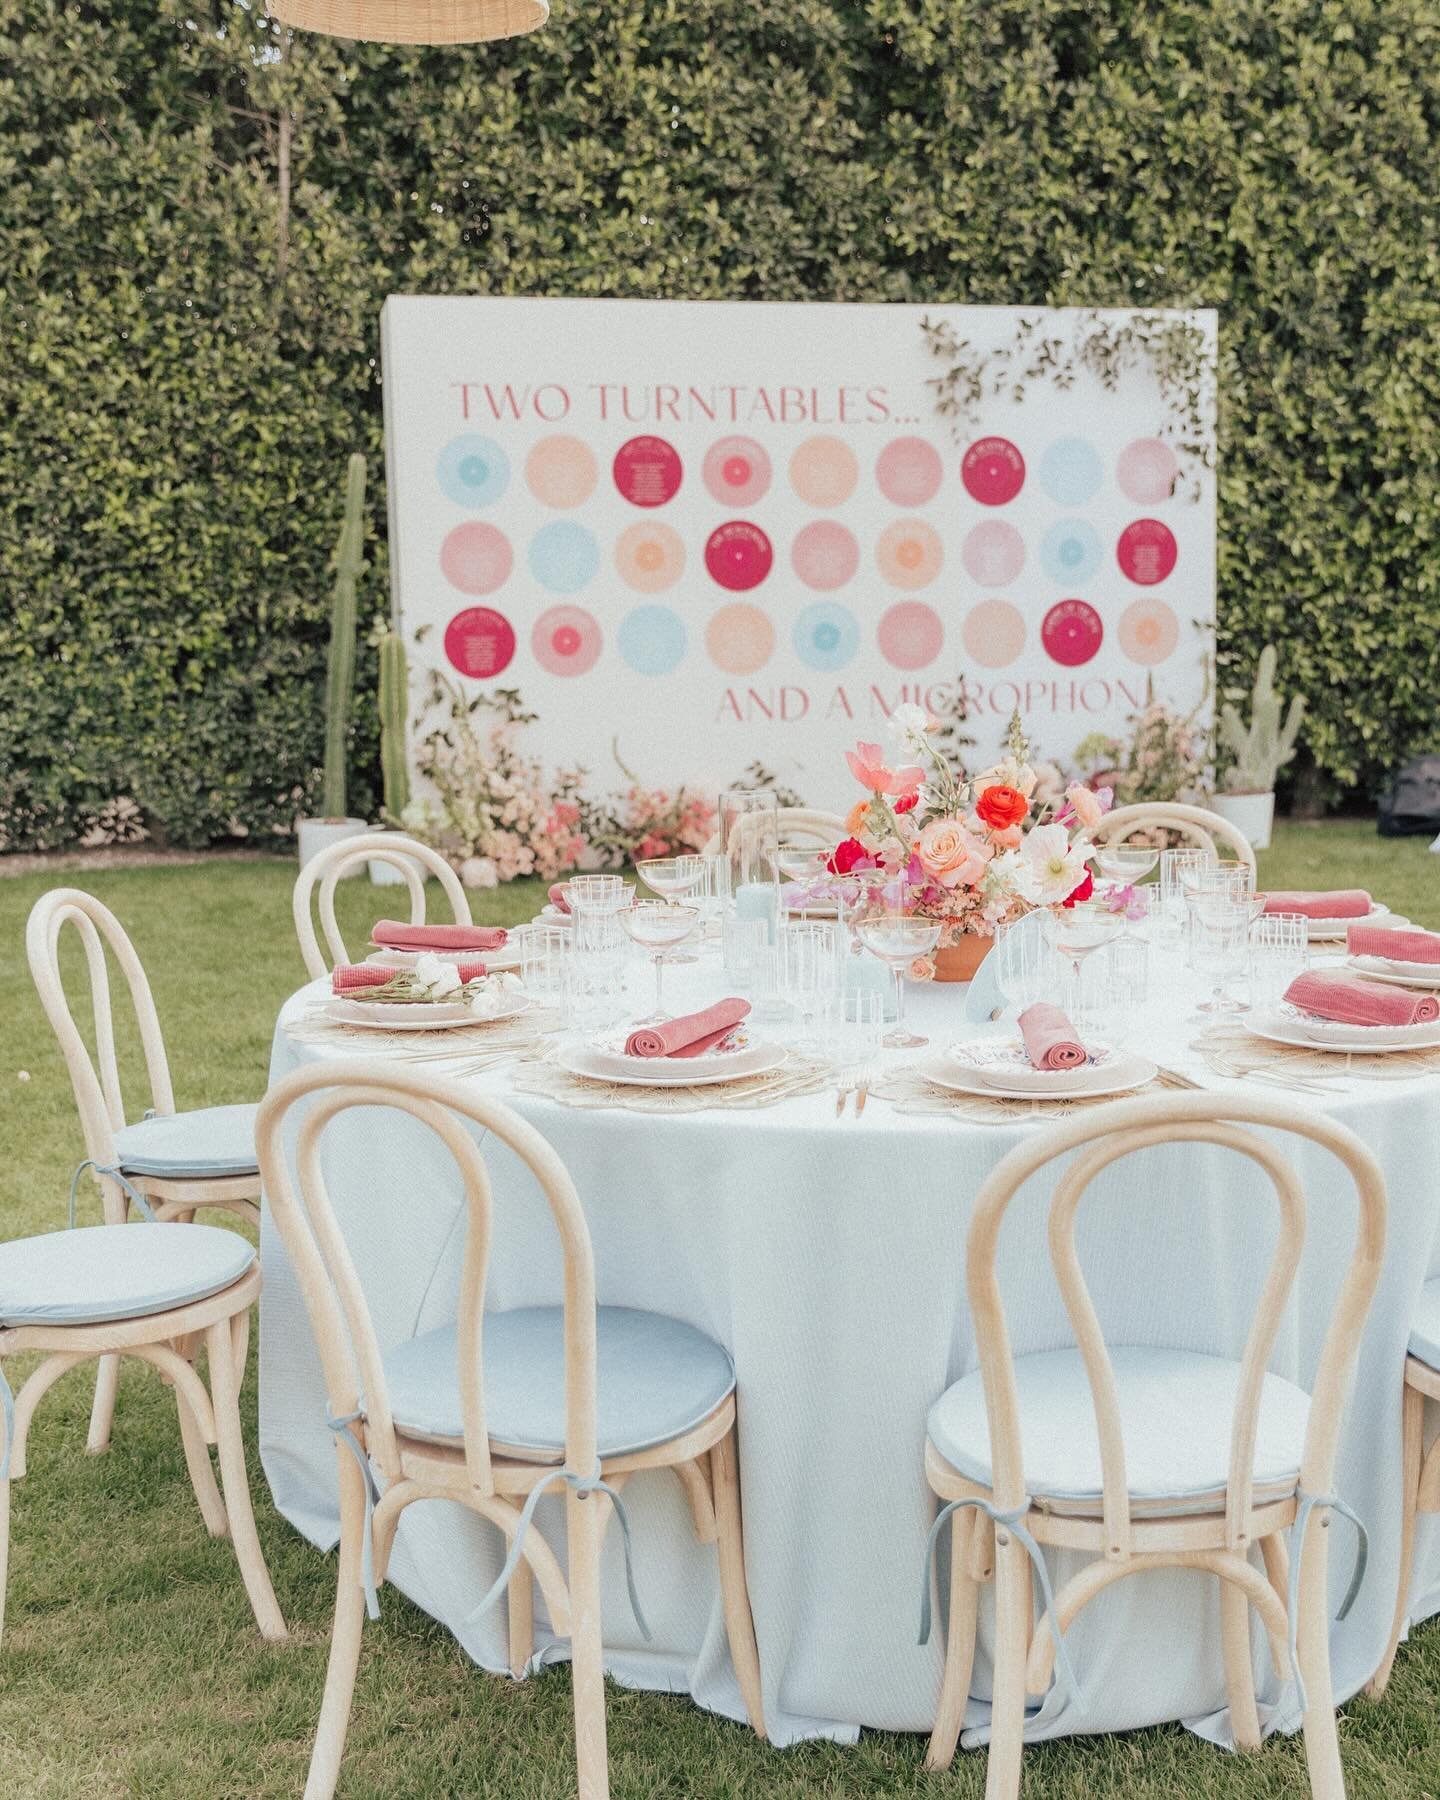 A+A&rsquo;s day was full of color and fun! They turned their love of music into a seating chart complete with music record table numbers 🎶

Photo: @brogenjessup 
Planner: @amorology 

#weddings #weddingphotographer #weddingplanner #luxurywedding #we